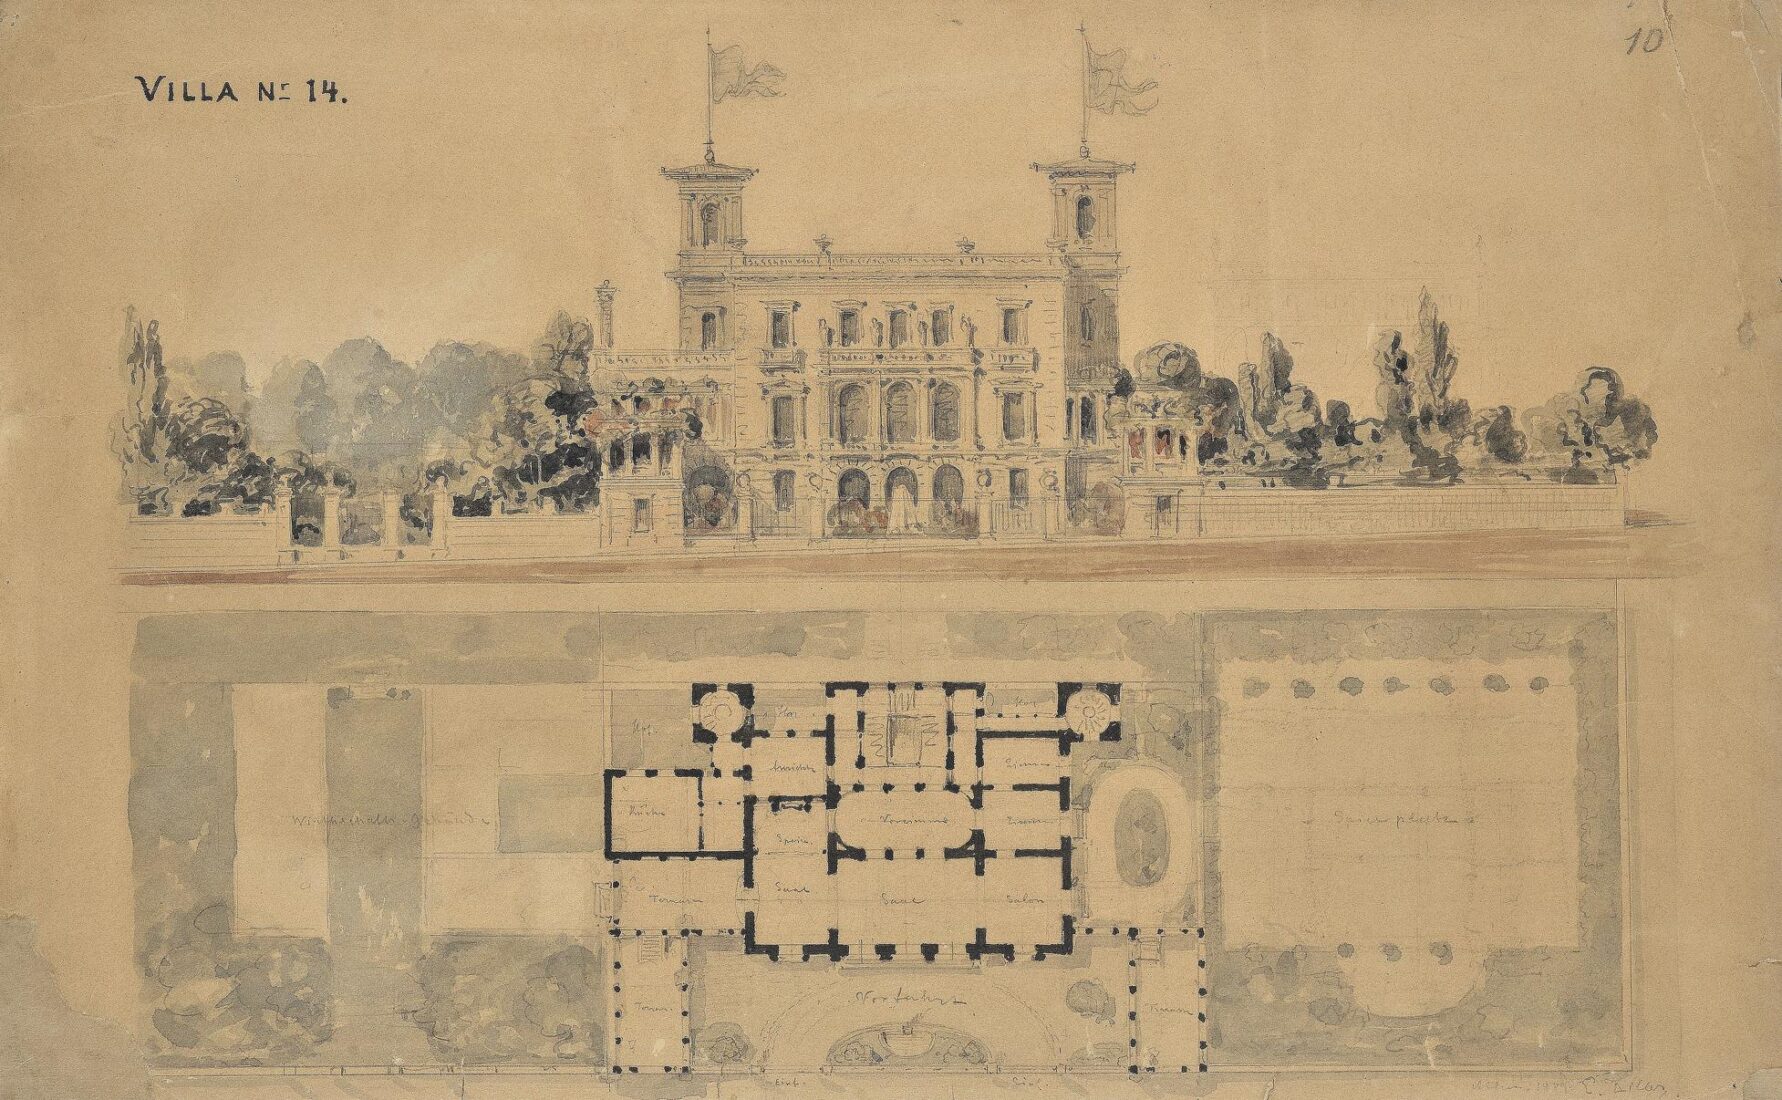 Mansion with two Towers (Project for a palace?), Main Facade, Floor Plan and Garden with Playground and Auxiliary Building
right: Spielplatz, left: Wirtschaftsgebaude, Vorfahrt
[Villa Νο. 14] - Ziller Ernst